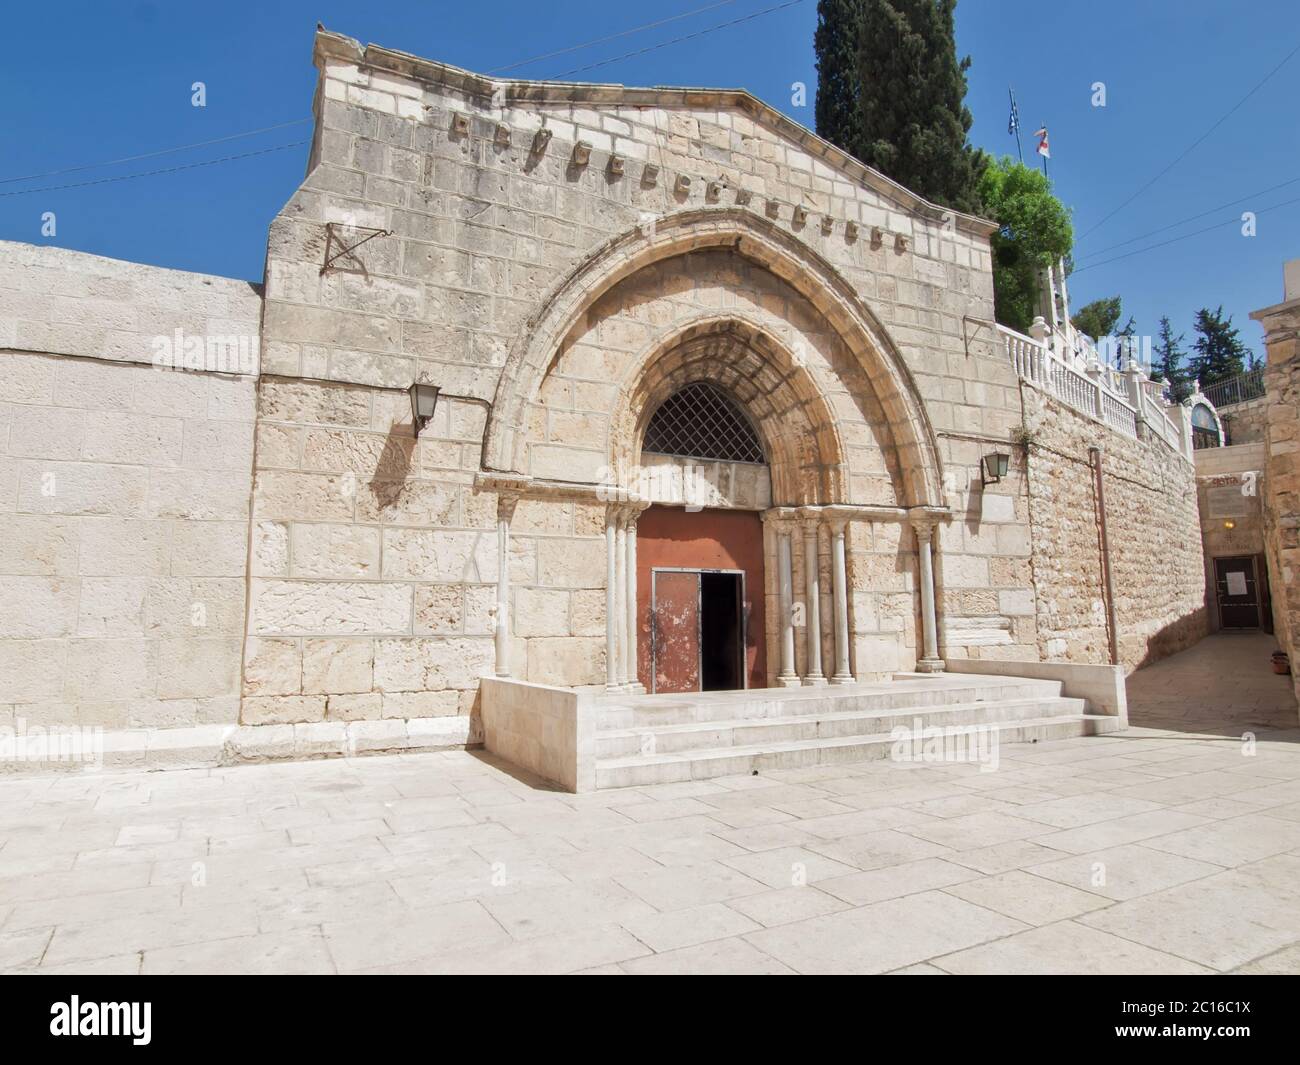 The Tomb of Mary. This is regarded to be the burial place of Mary, Mother of Jesus. Jerusalem, Israel. Stock Photo